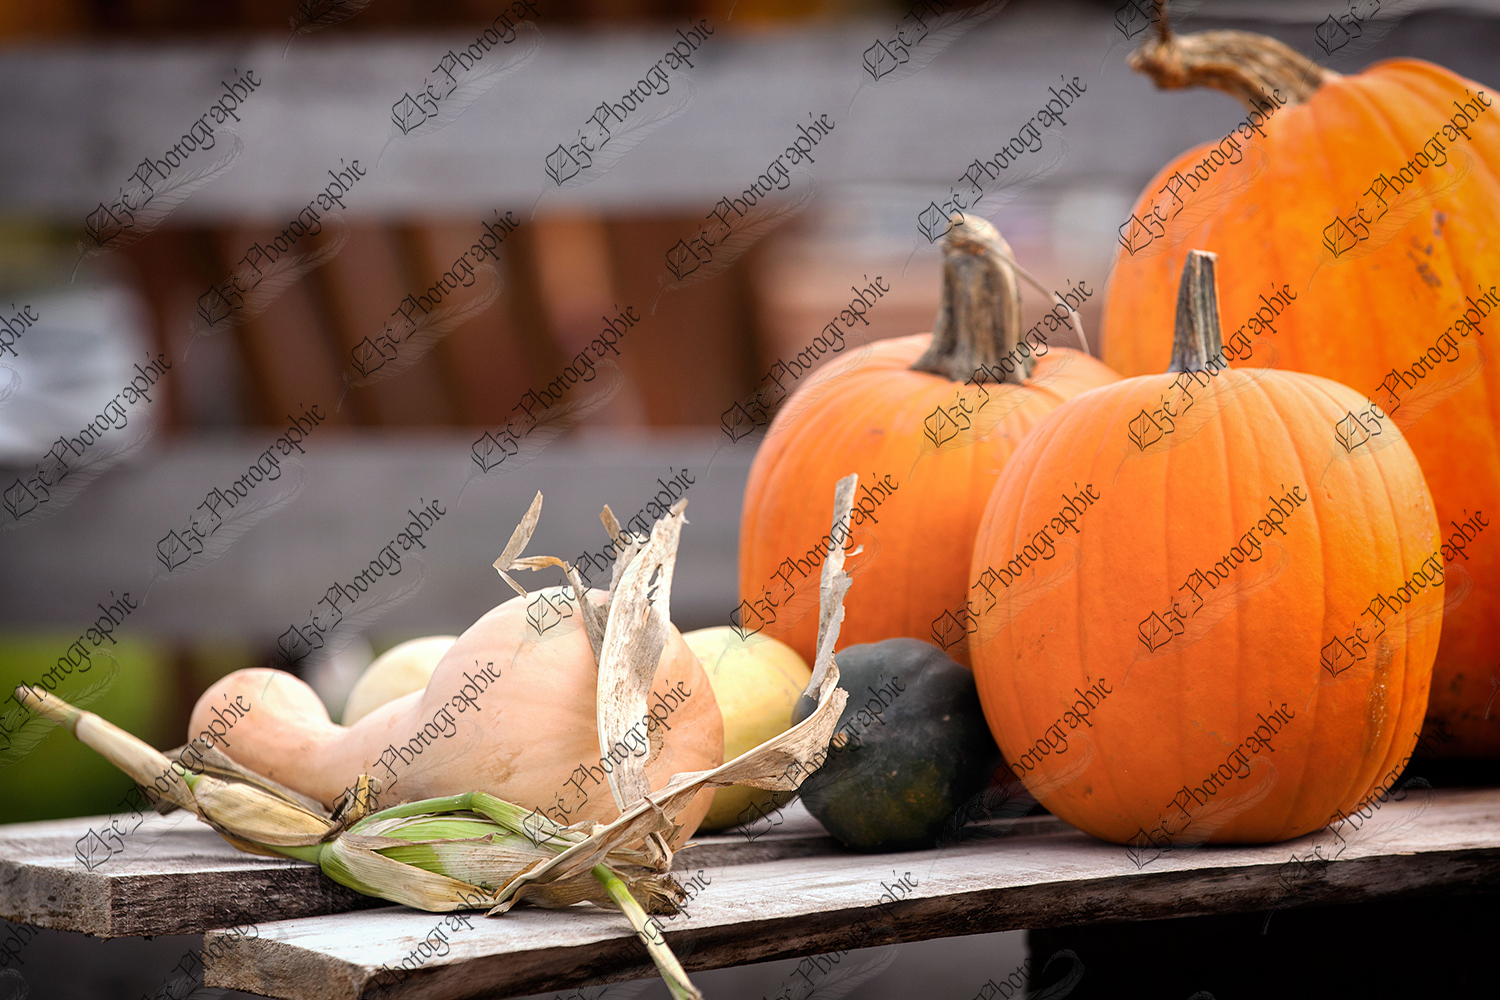 elze_photo_4636_table_automne_courges_fall_harvest